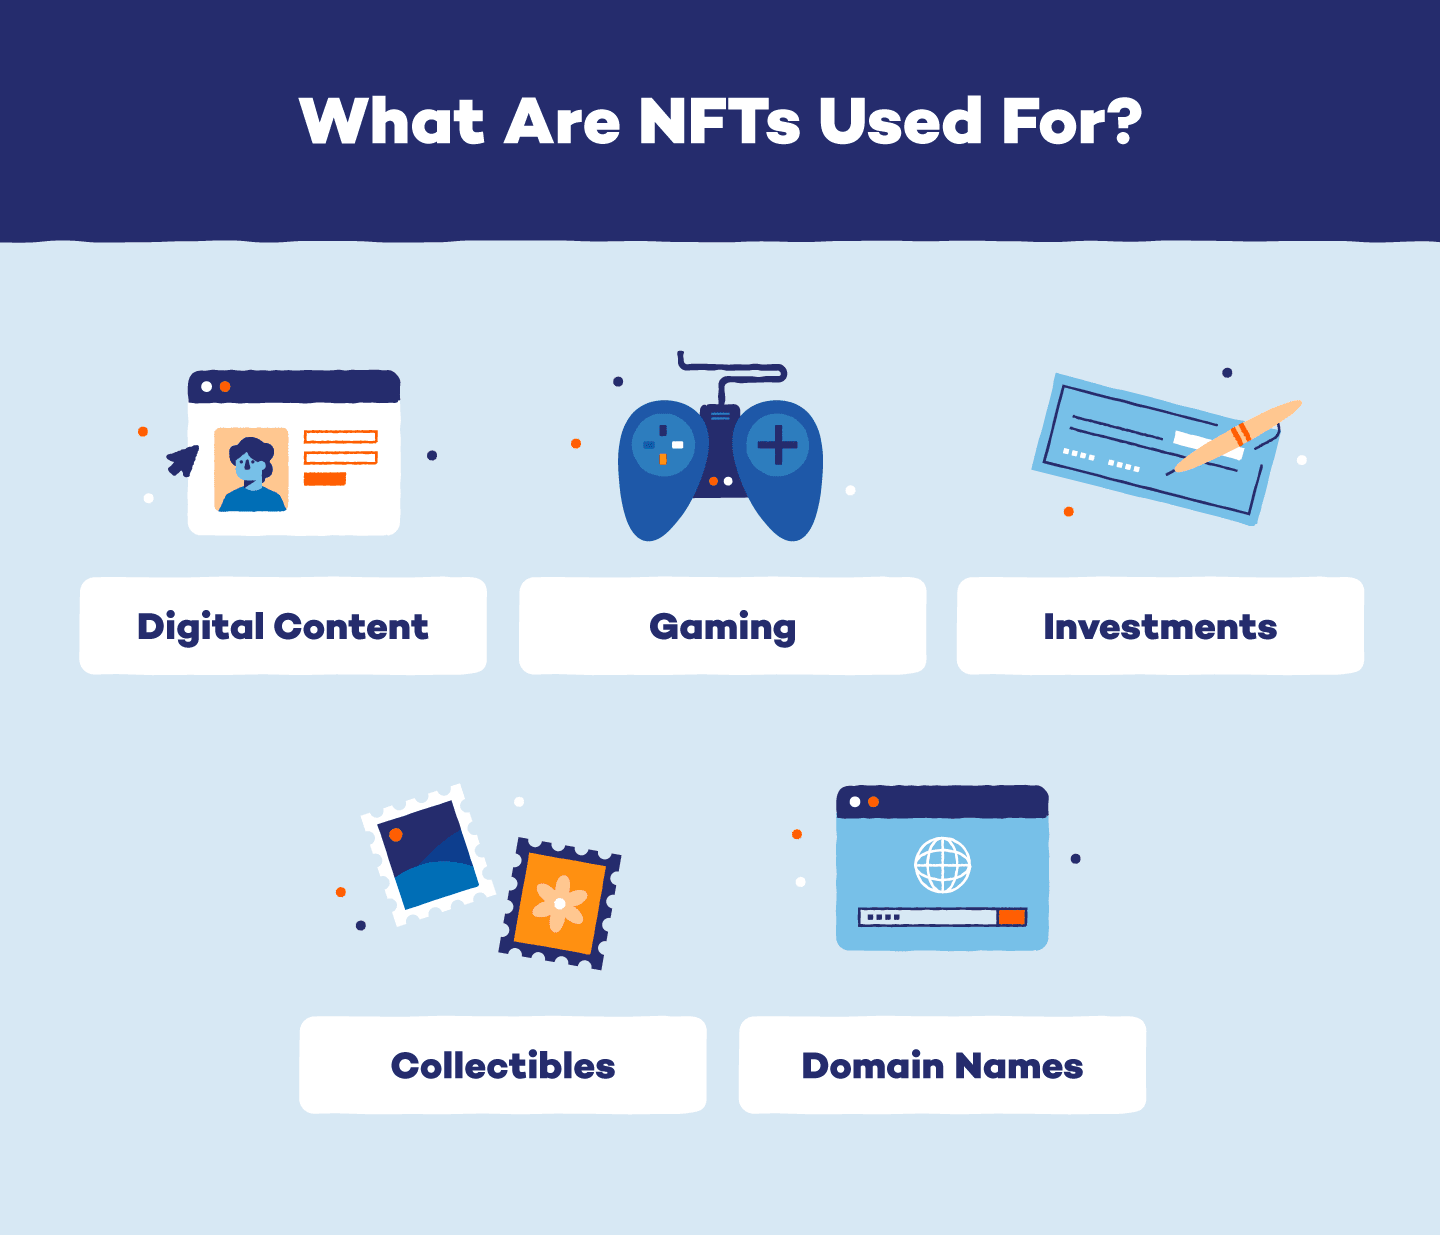 What is the purpose of nfts?